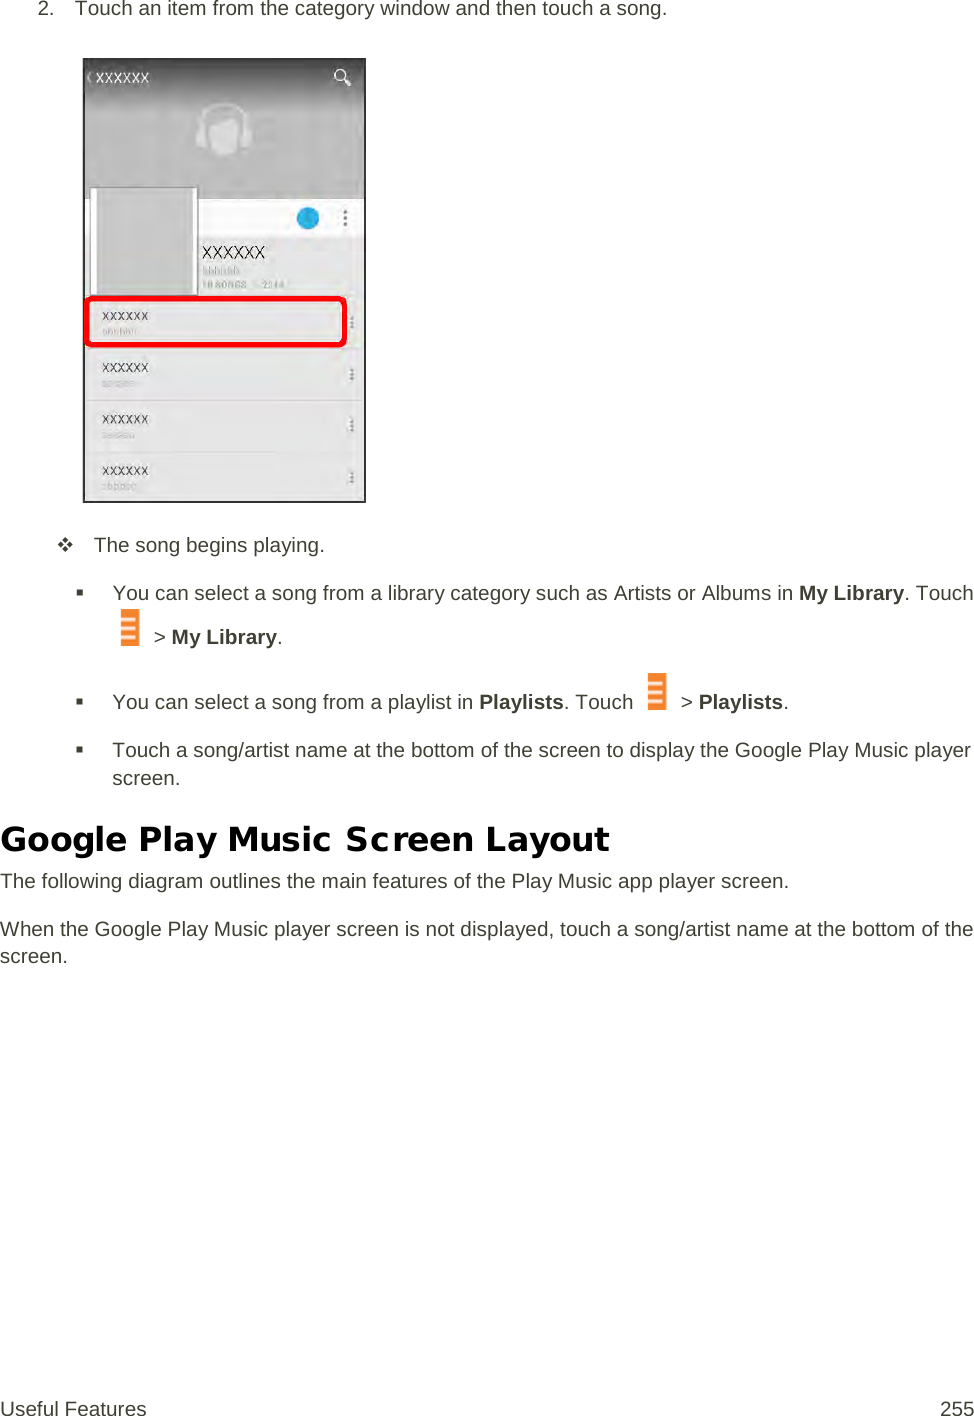 2. Touch an item from the category window and then touch a song.    The song begins playing.  You can select a song from a library category such as Artists or Albums in My Library. Touch  &gt; My Library.  You can select a song from a playlist in Playlists. Touch   &gt; Playlists.  Touch a song/artist name at the bottom of the screen to display the Google Play Music player screen. Google Play Music Screen Layout The following diagram outlines the main features of the Play Music app player screen. When the Google Play Music player screen is not displayed, touch a song/artist name at the bottom of the screen. Useful Features 255   